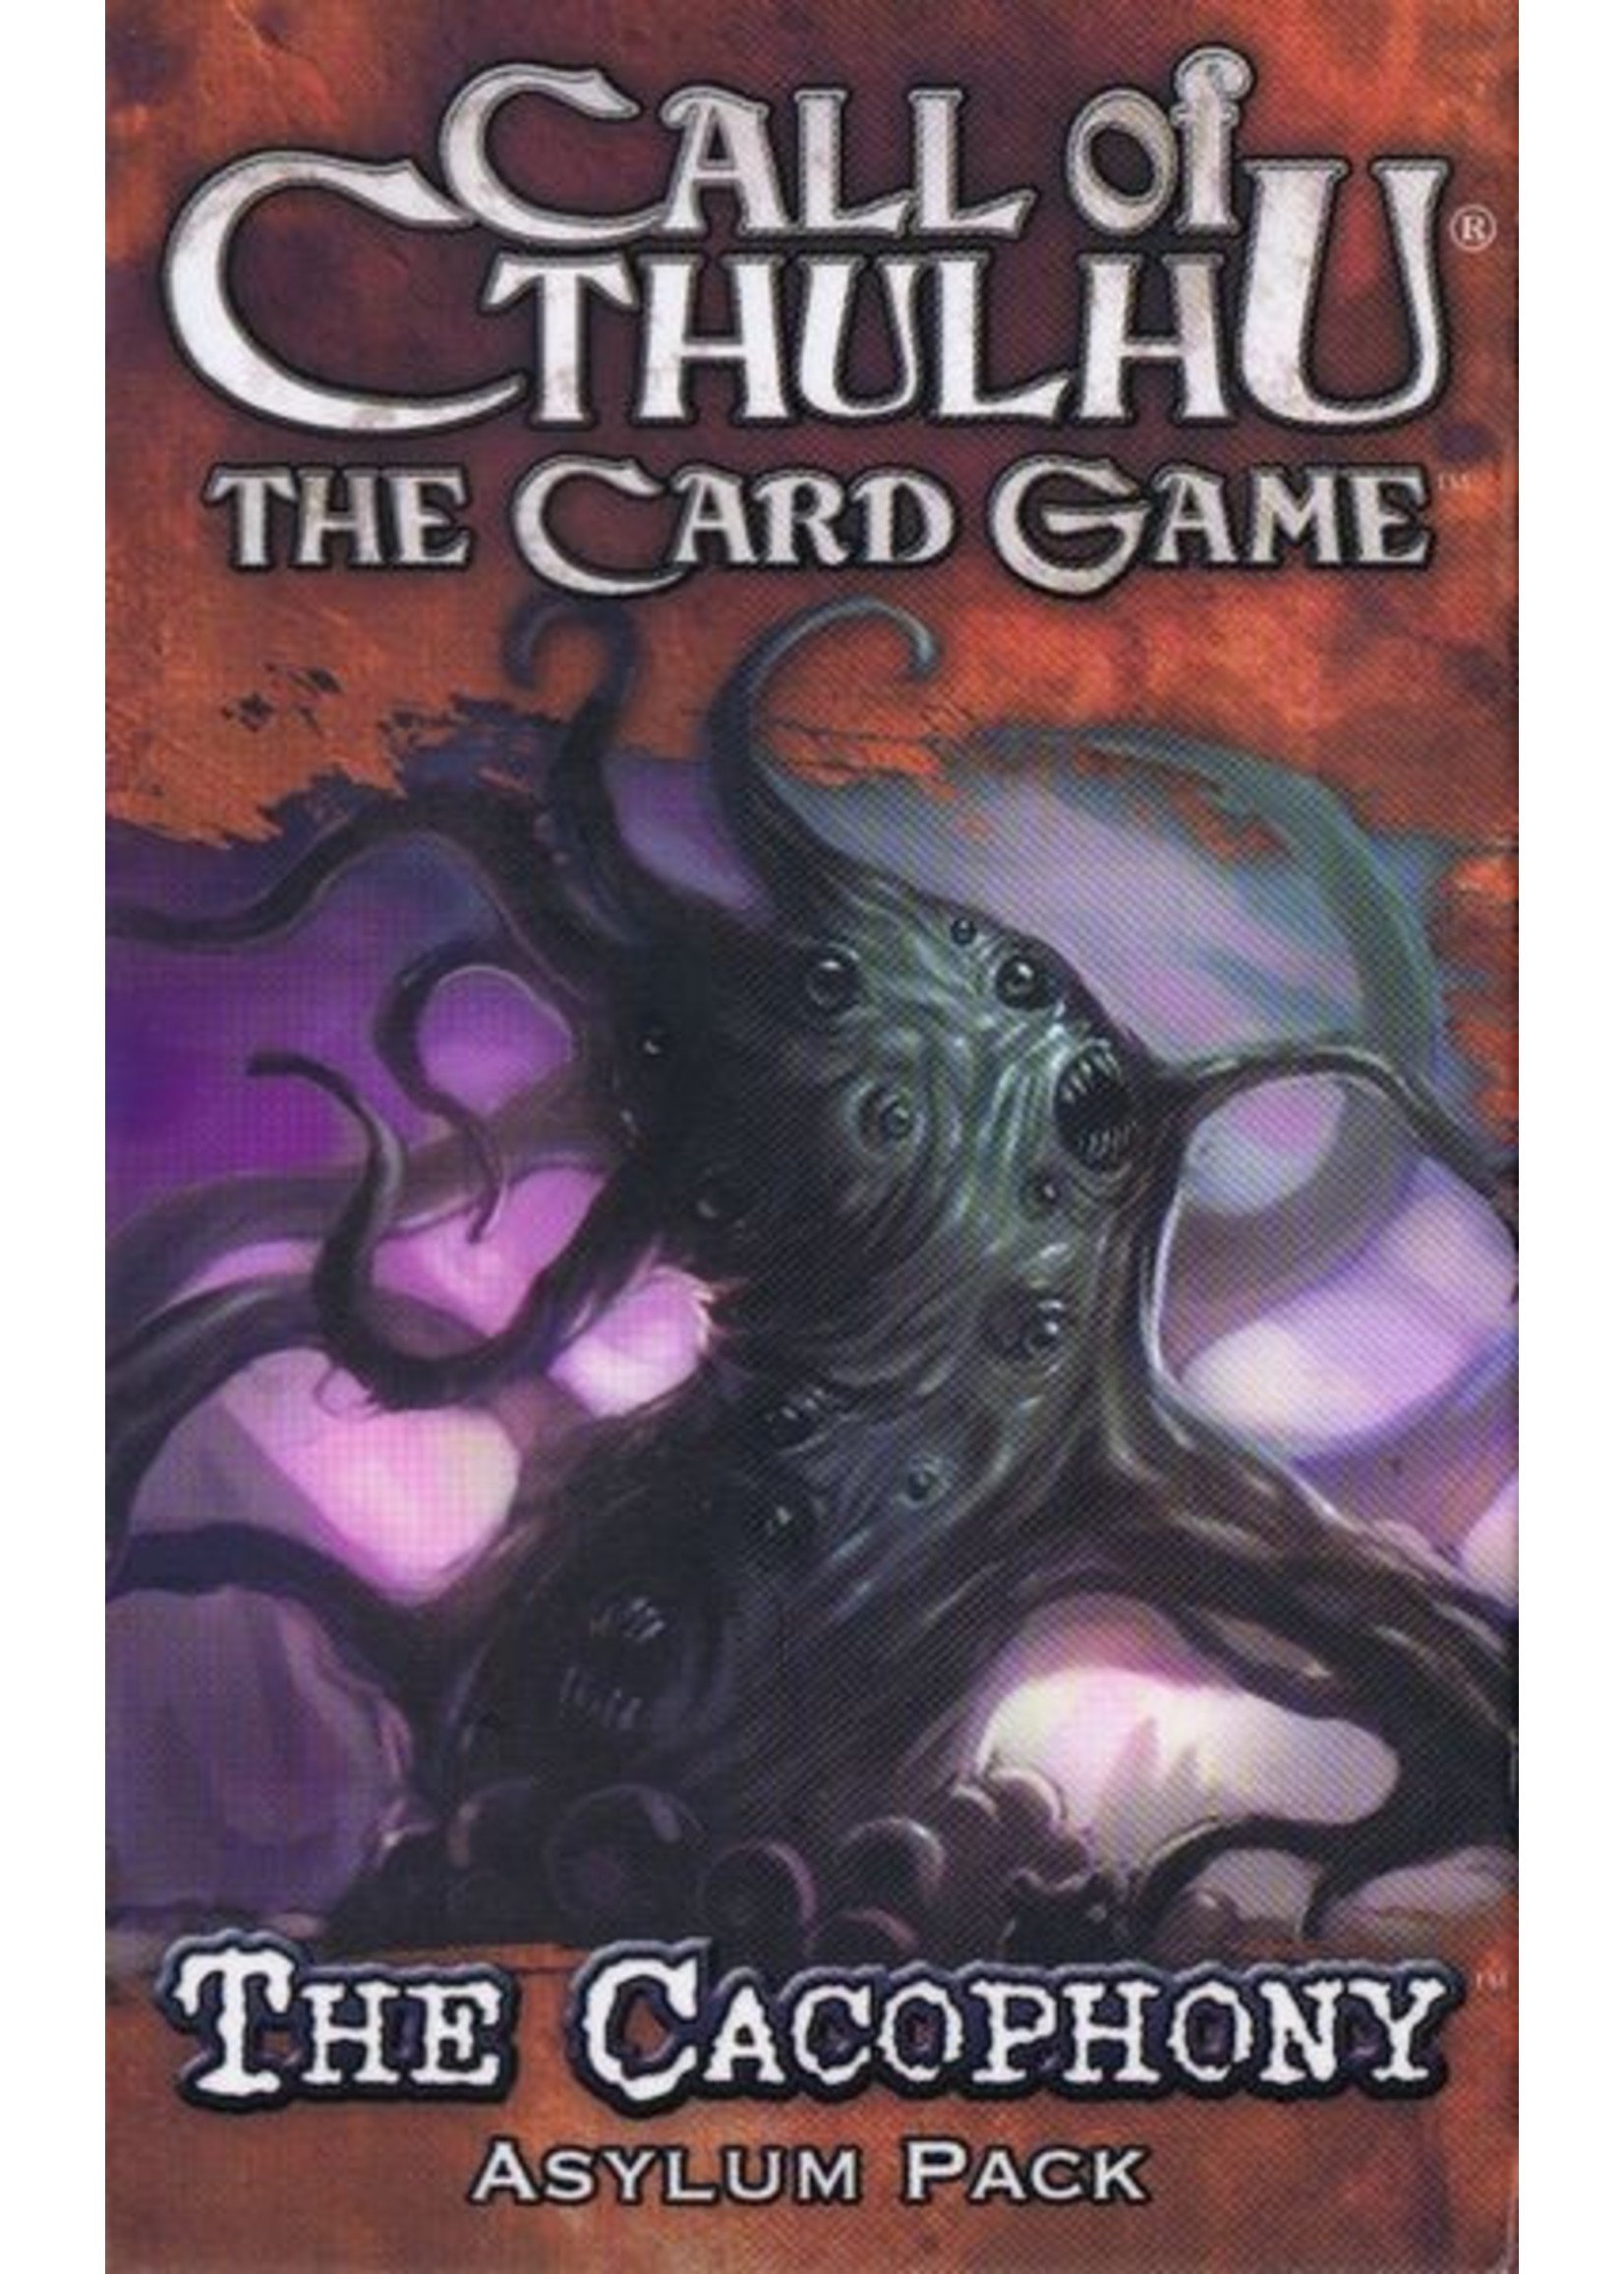 Call of Cthulhu LCG: The Cacophony Asylum Pack